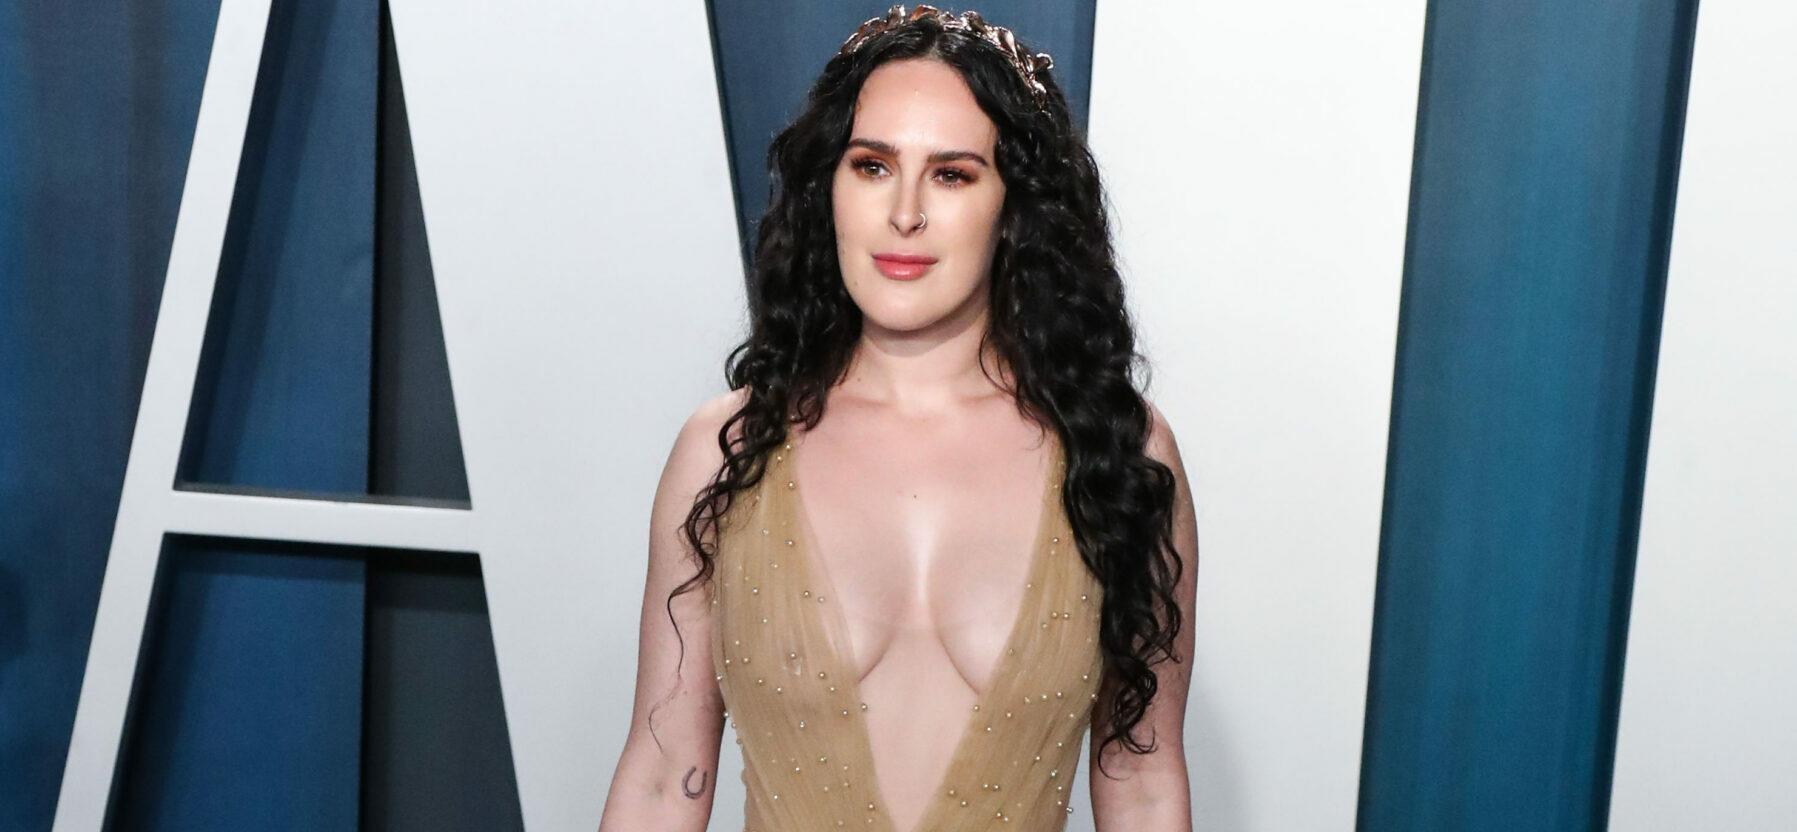 Rumer Willis Wants A ‘Unique And Different’ Name For Unborn Child